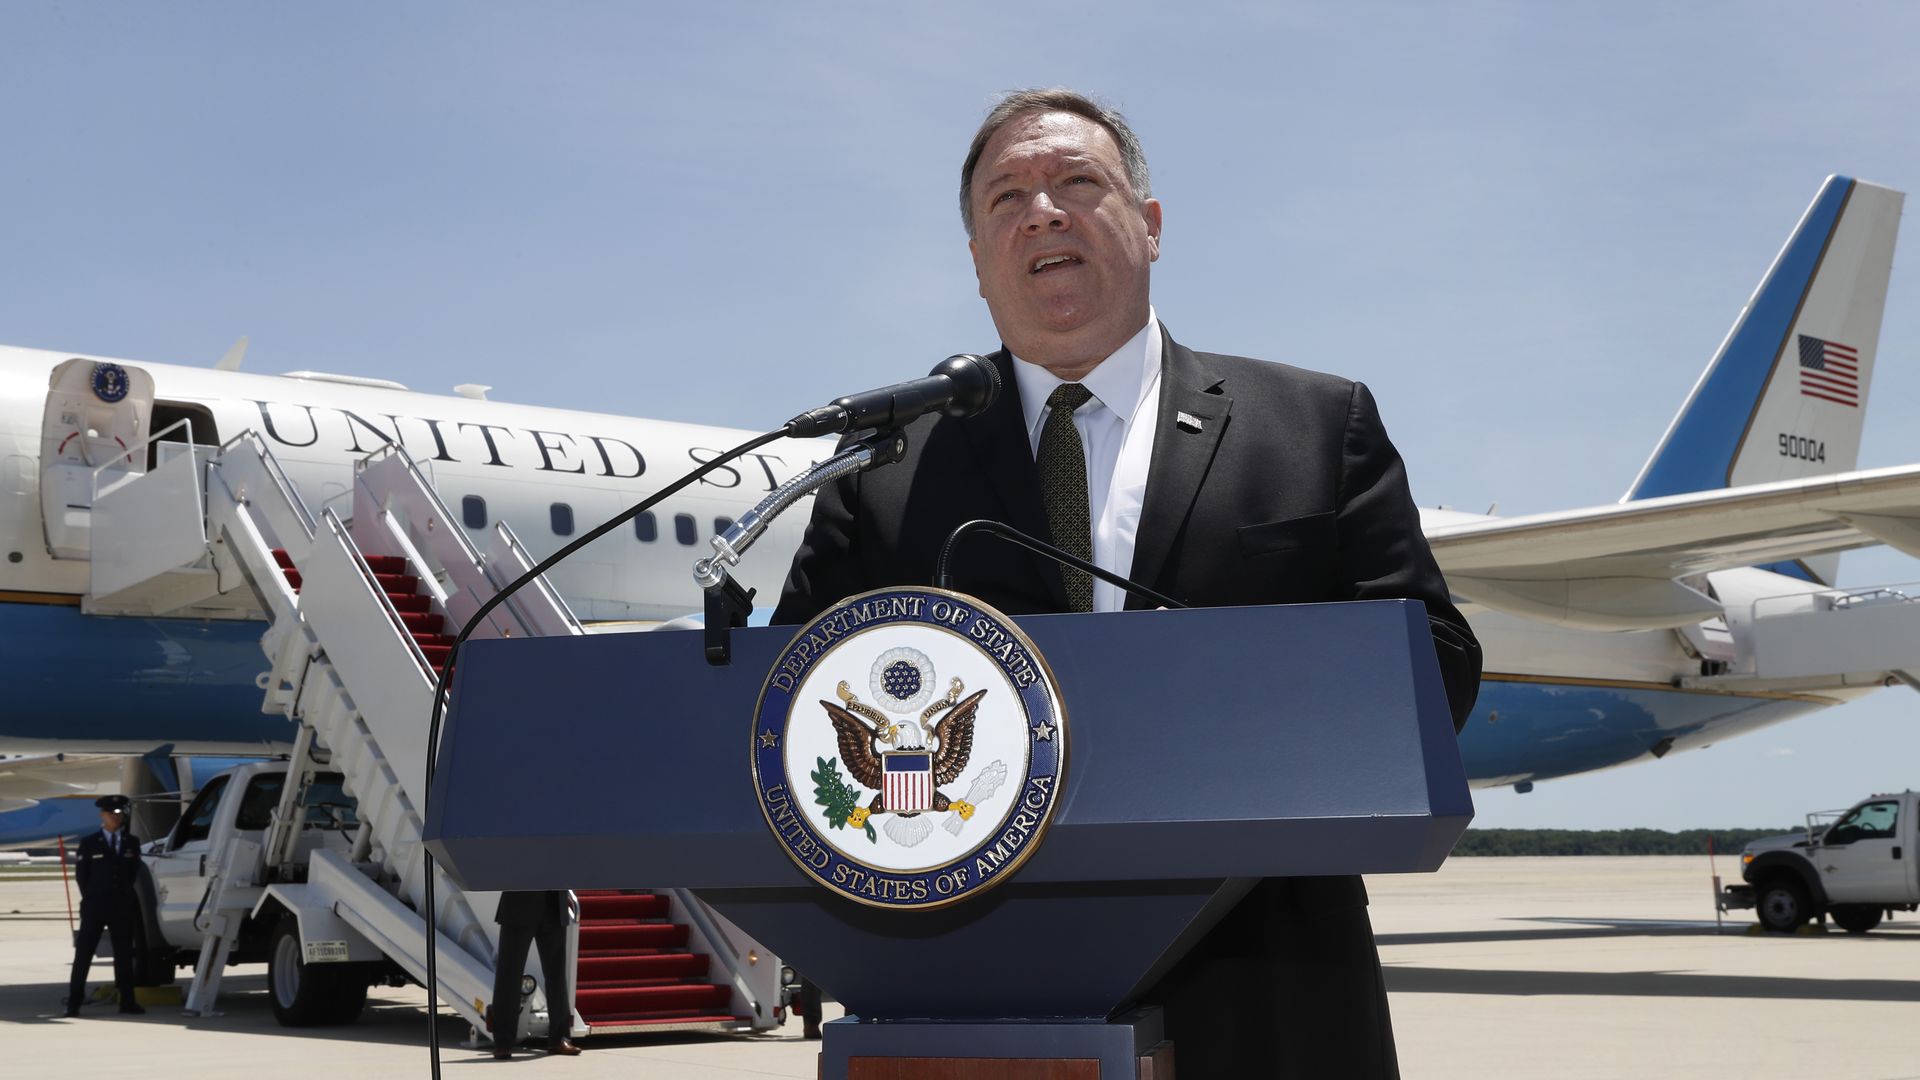  Secretary of State Mike Pompeo speaks to the media at Andrews Air Force Base, near Washington on June 23, 2019, before boarding a plane headed to Jeddah, Saudi Arabia.